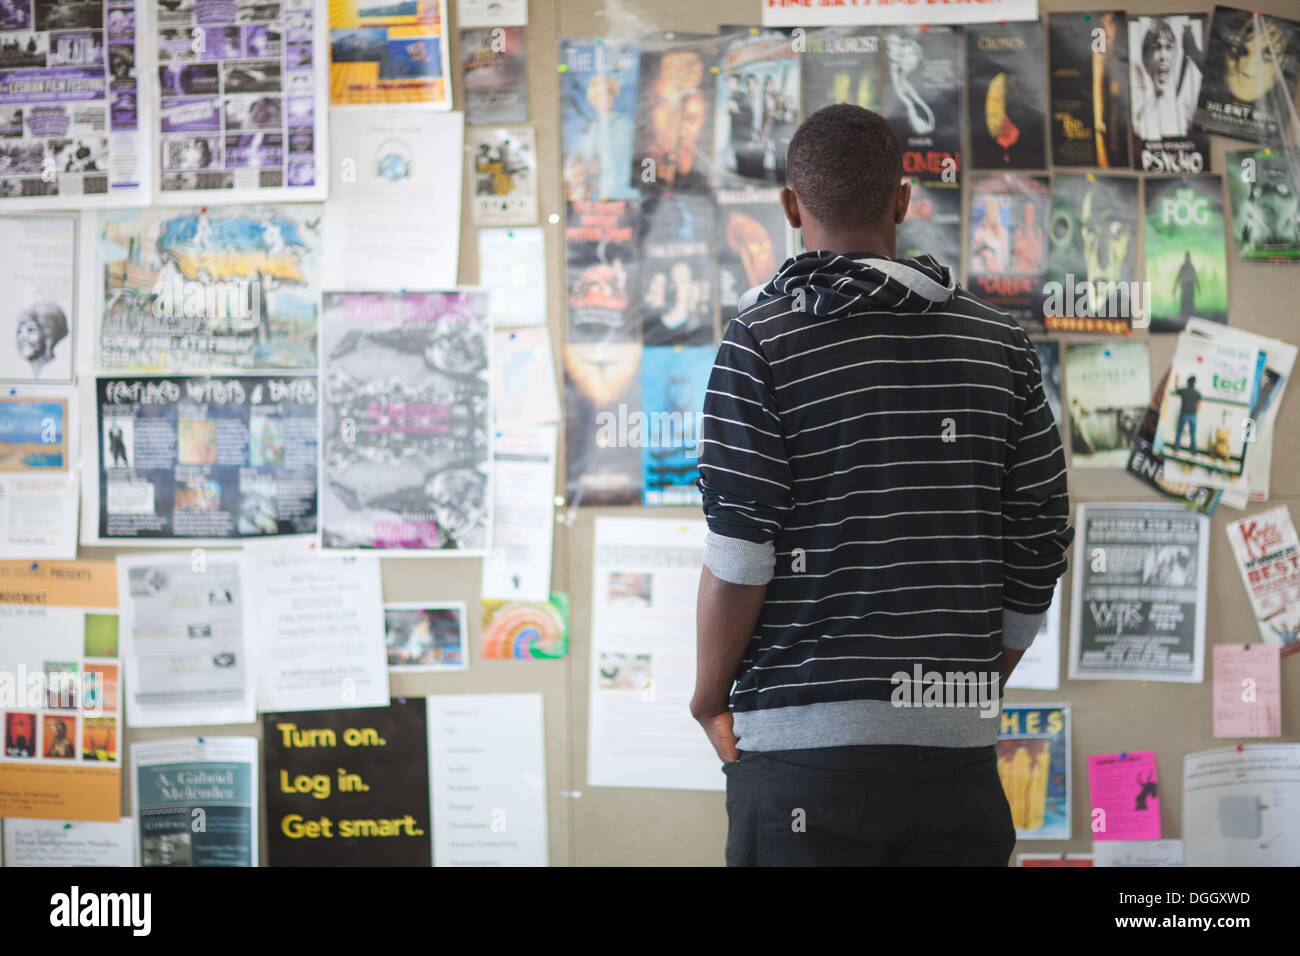 Eighteen year old looks at a bulletin board in college cafeteria filled with job postings, movie listings, event schedule. Stock Photo